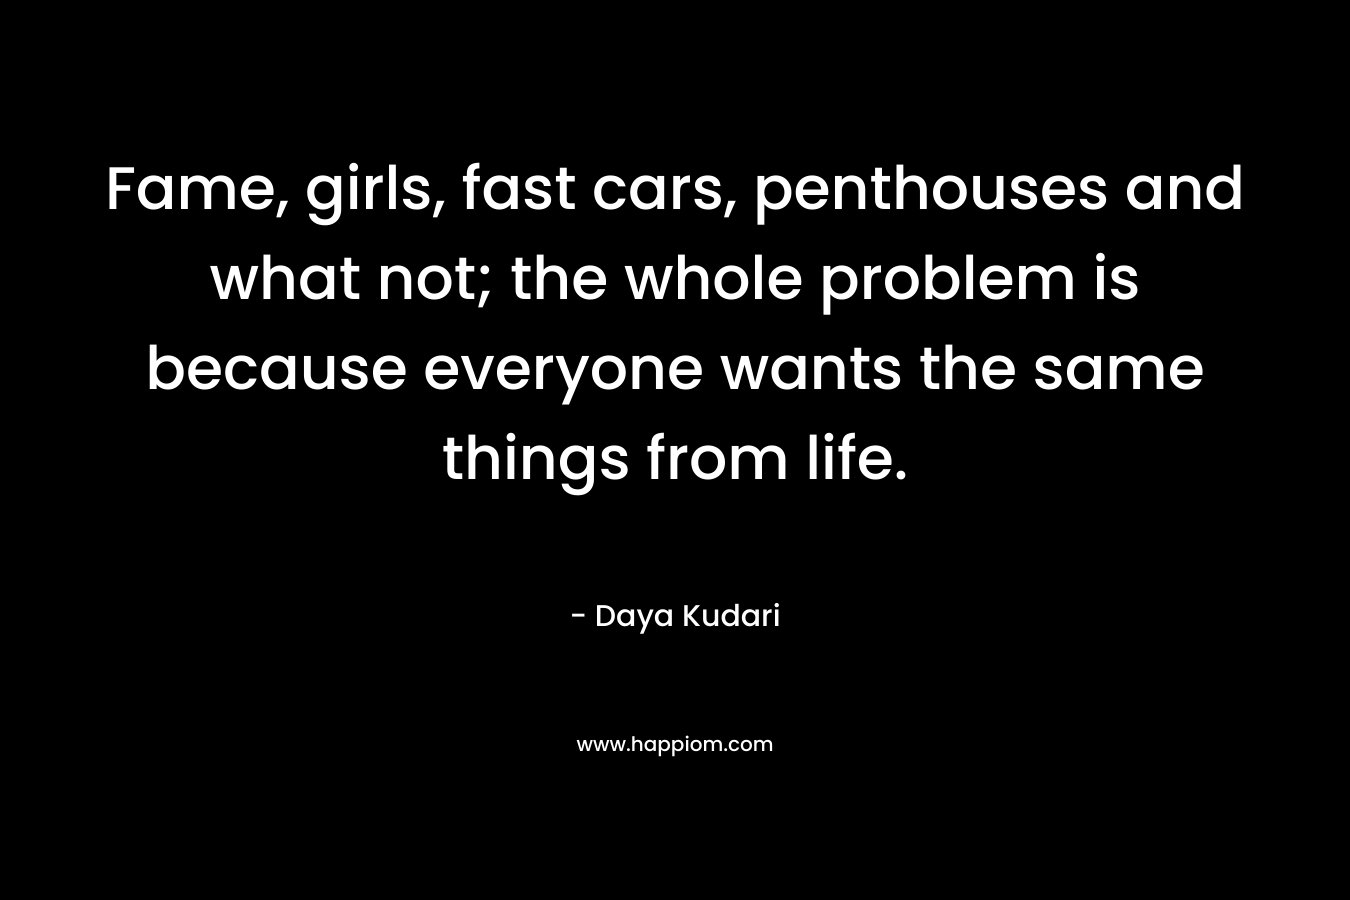 Fame, girls, fast cars, penthouses and what not; the whole problem is because everyone wants the same things from life.